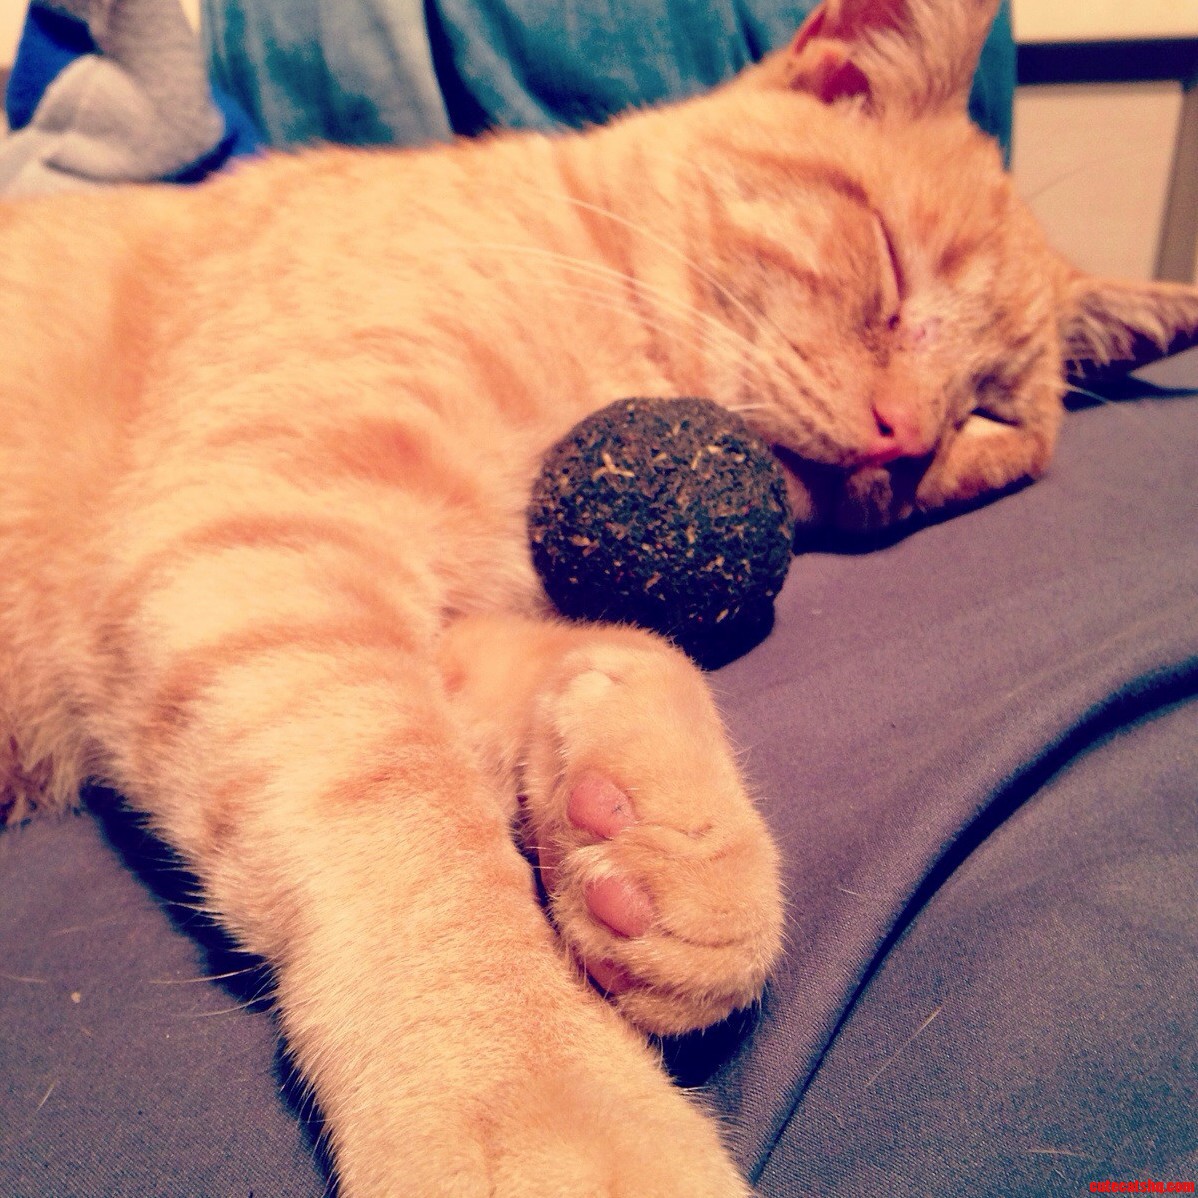 Everyone Meet Pumpkin. I Rescued Him After Being Left By His Previous Owner. Now Hes Happy And Loves His Catnip Ball.